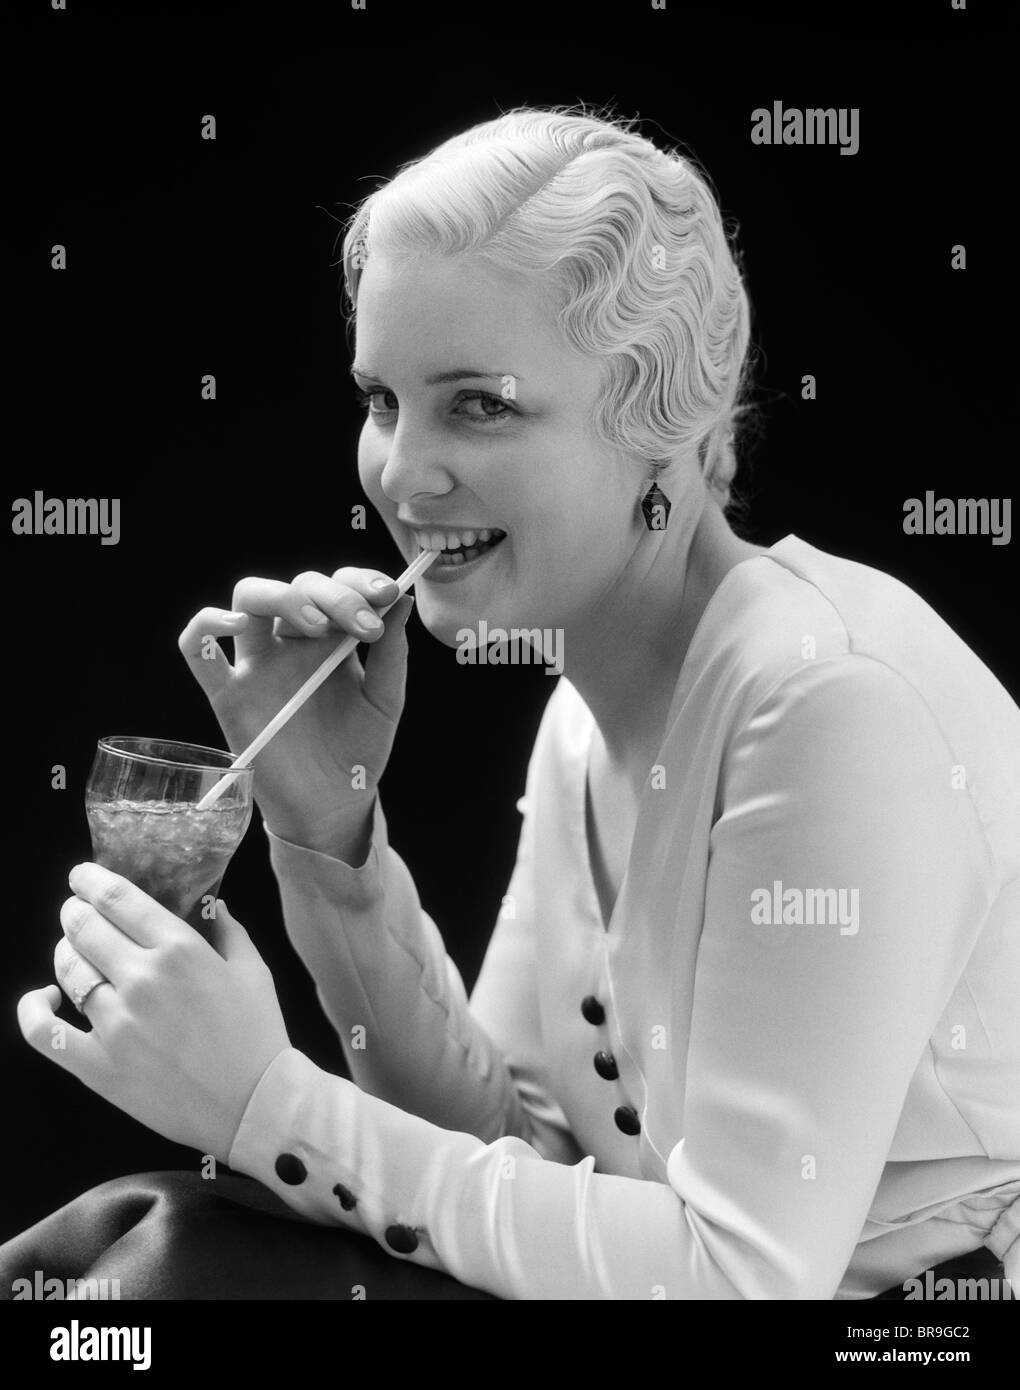 1930s BLOND WOMAN DRINKING SODA WITH A STRAW Stock Photo